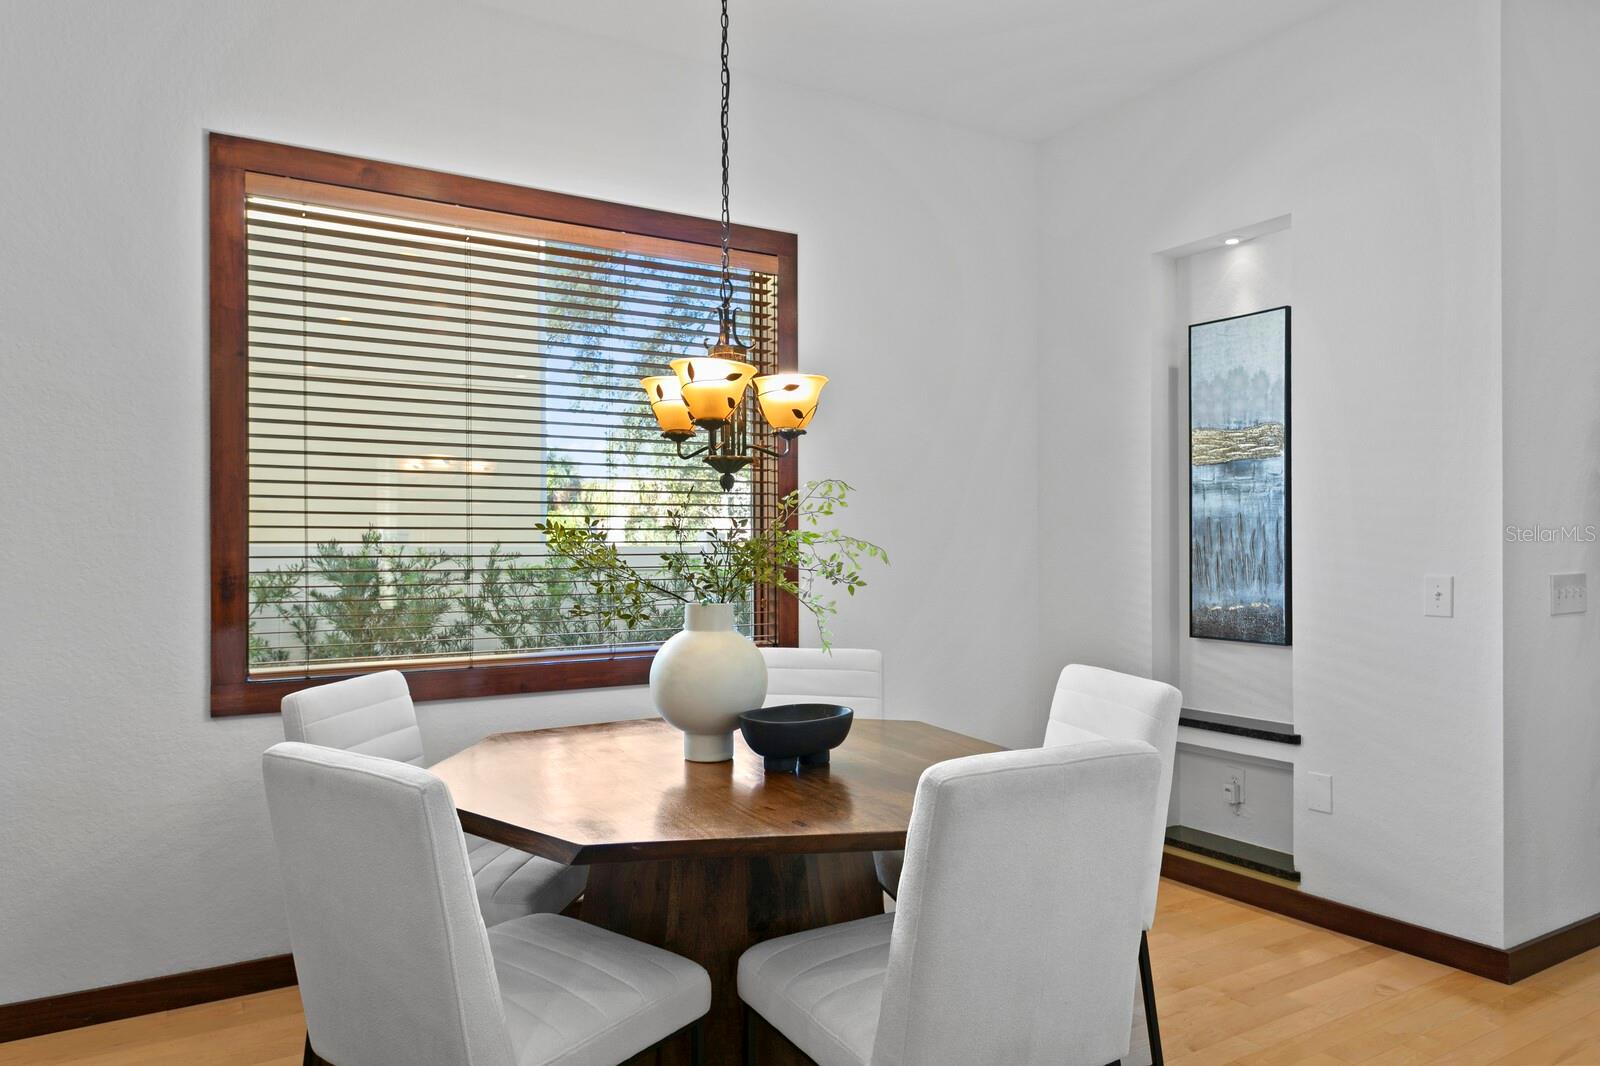 Great natural light in the casual dining area